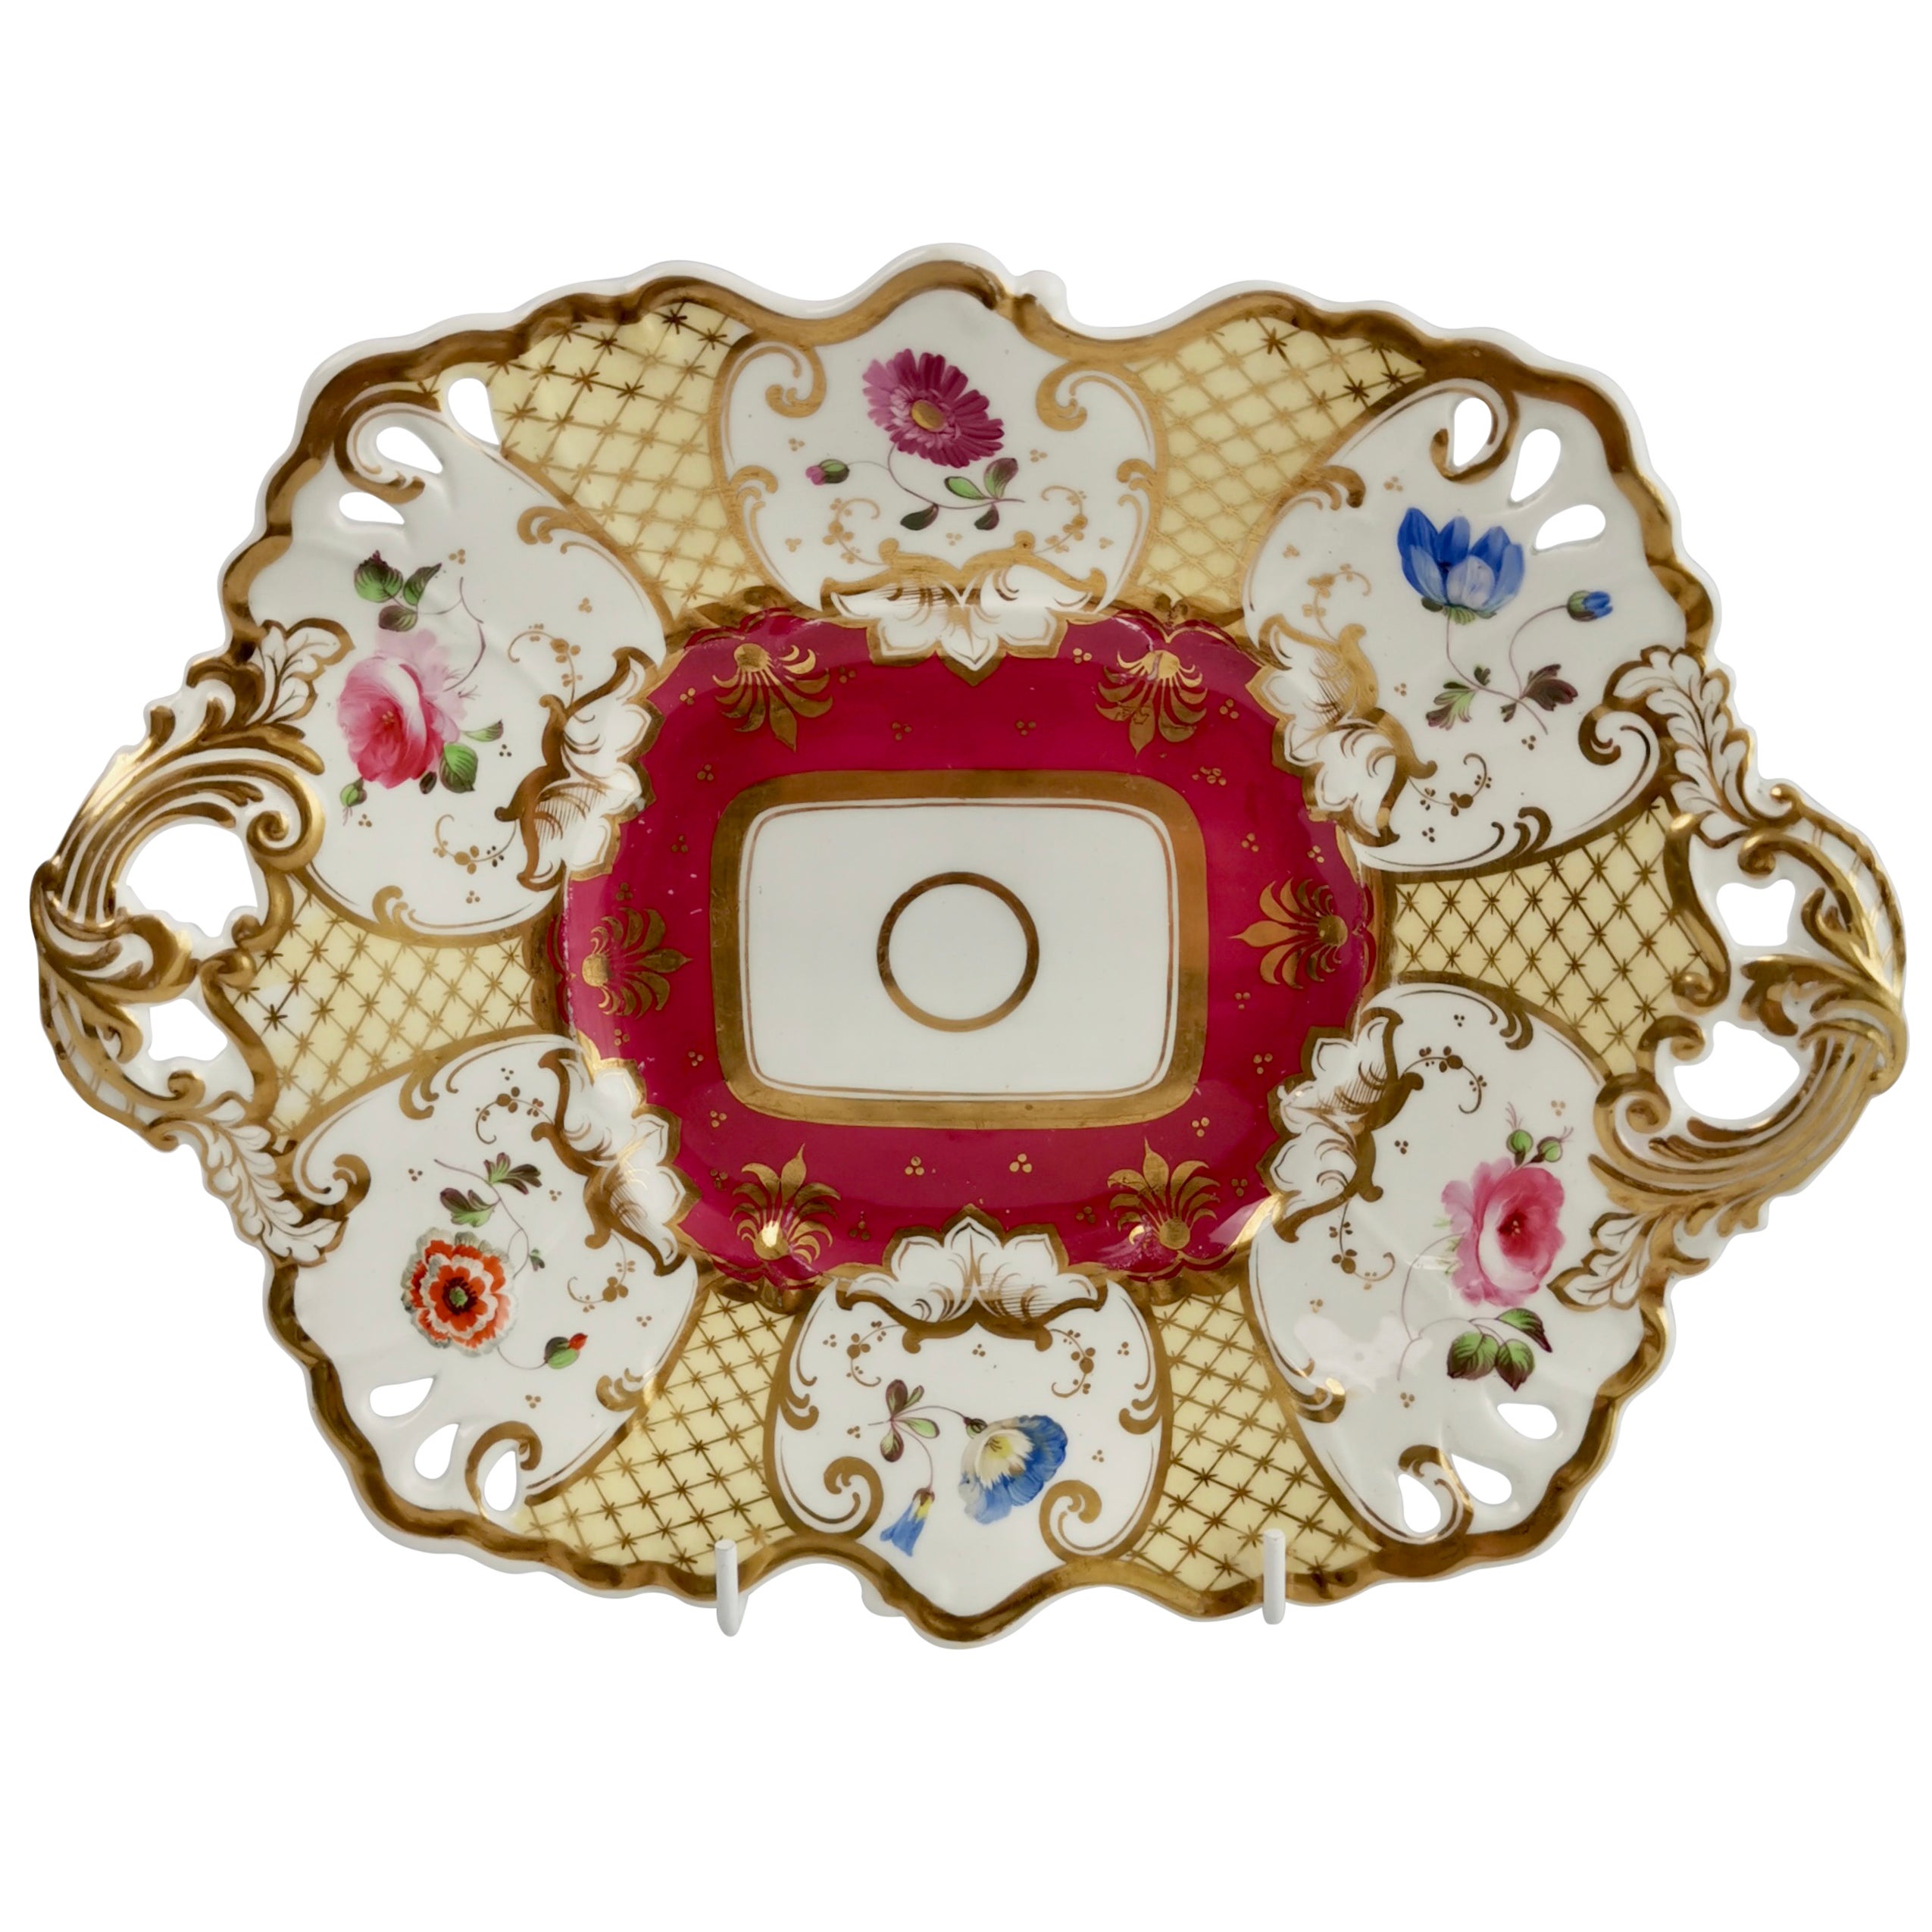 Samuel Alcock Porcelain Dish, Maroon, Gilt and Flowers, Rococo Revival, ca 1835